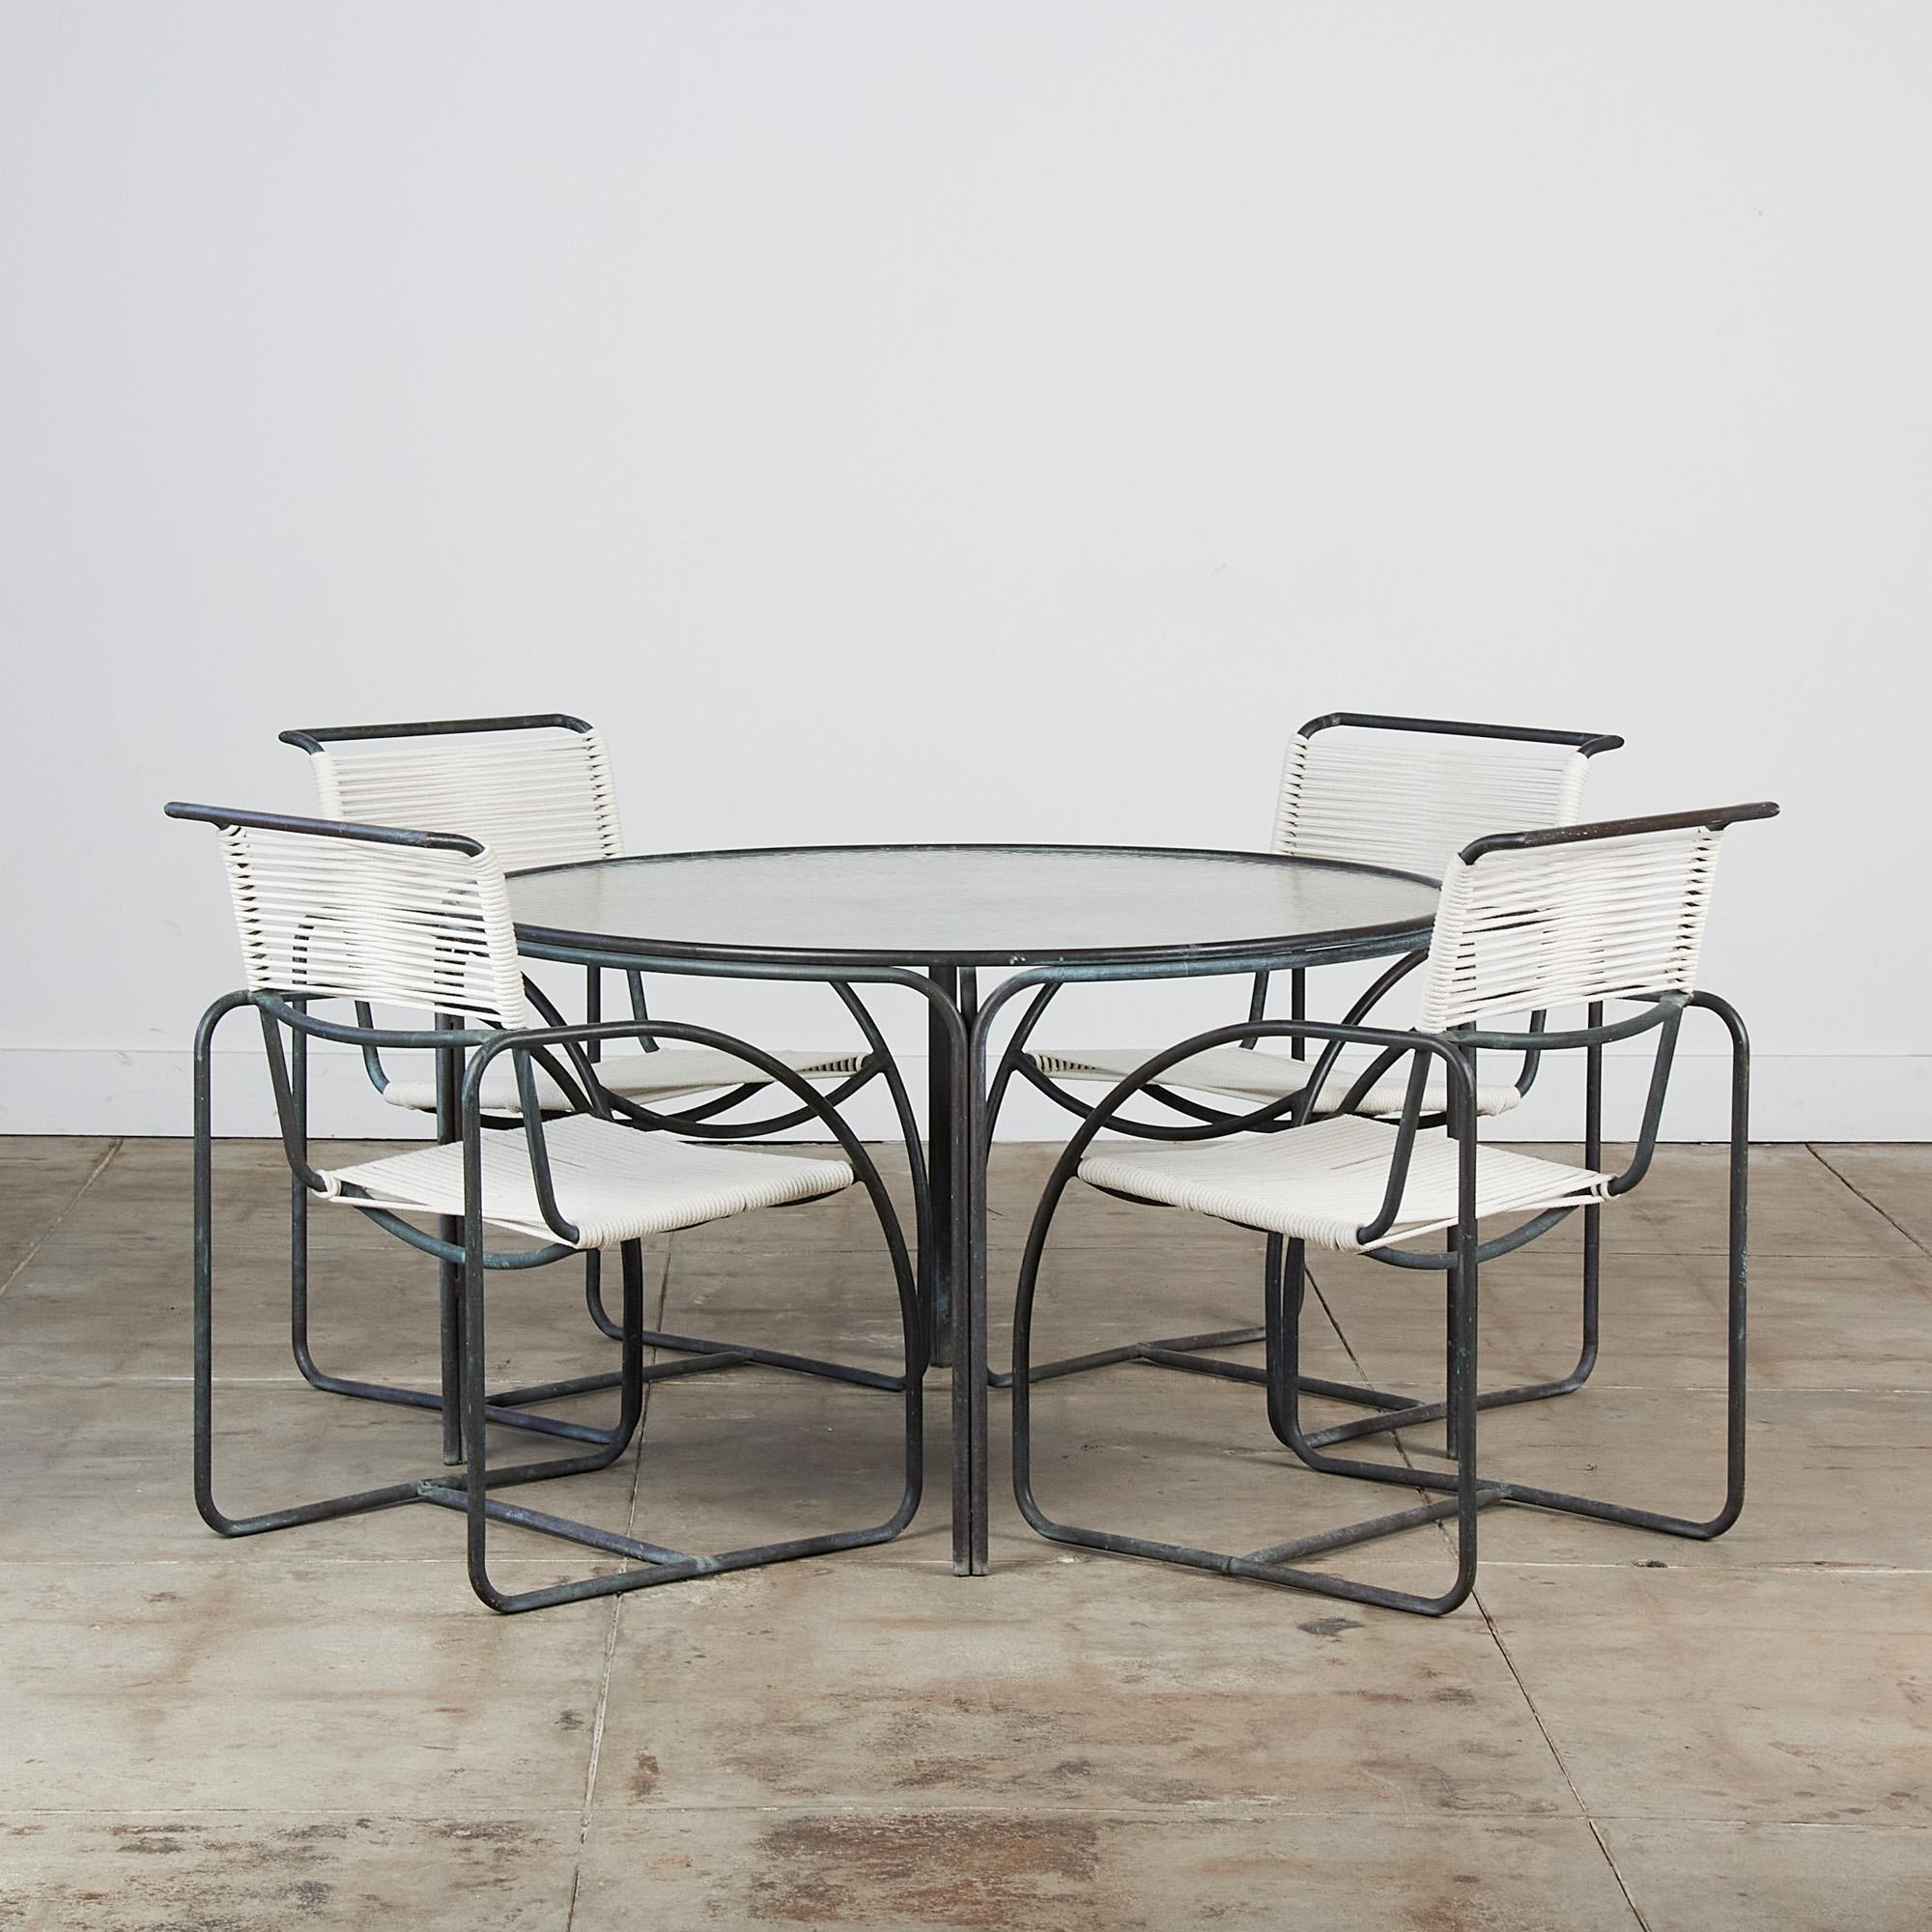 Patio dining set by Kipp Stewart for Terra of California, USA, c.1970s. This set from the 